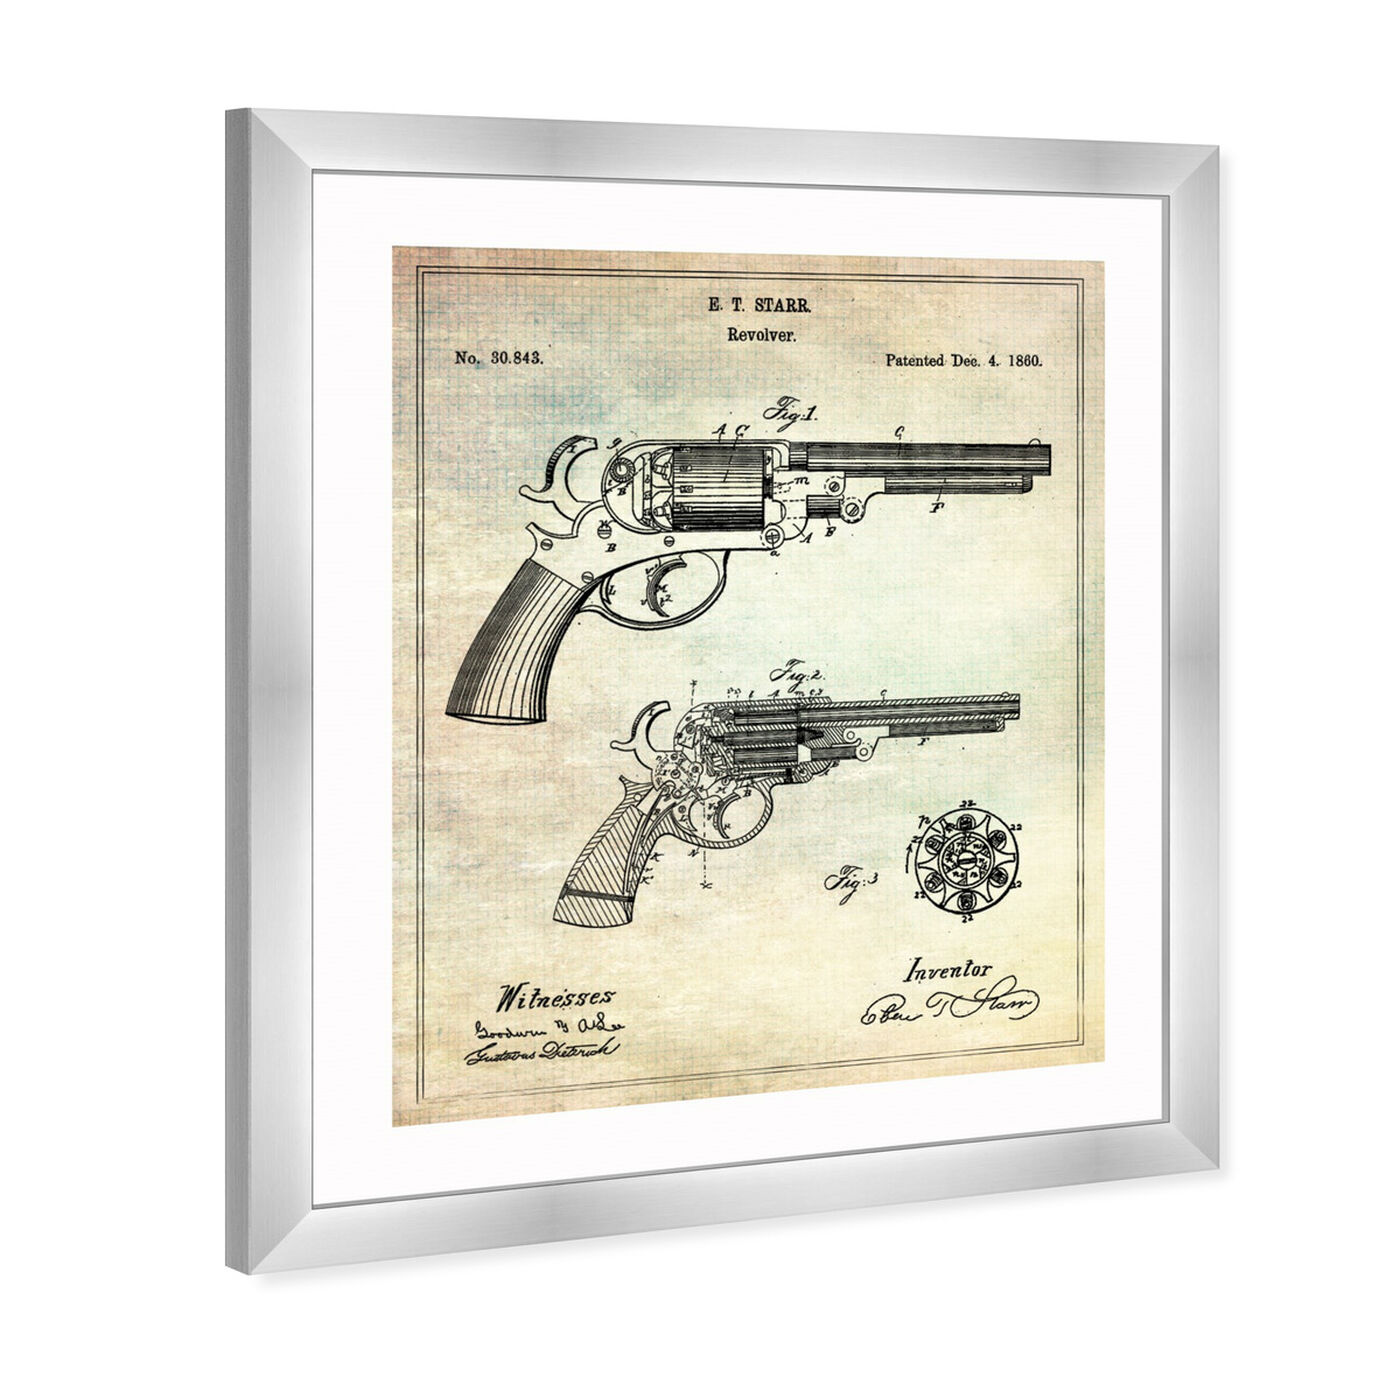 Angled view of Revolver 1860 featuring entertainment and hobbies and machine guns art.